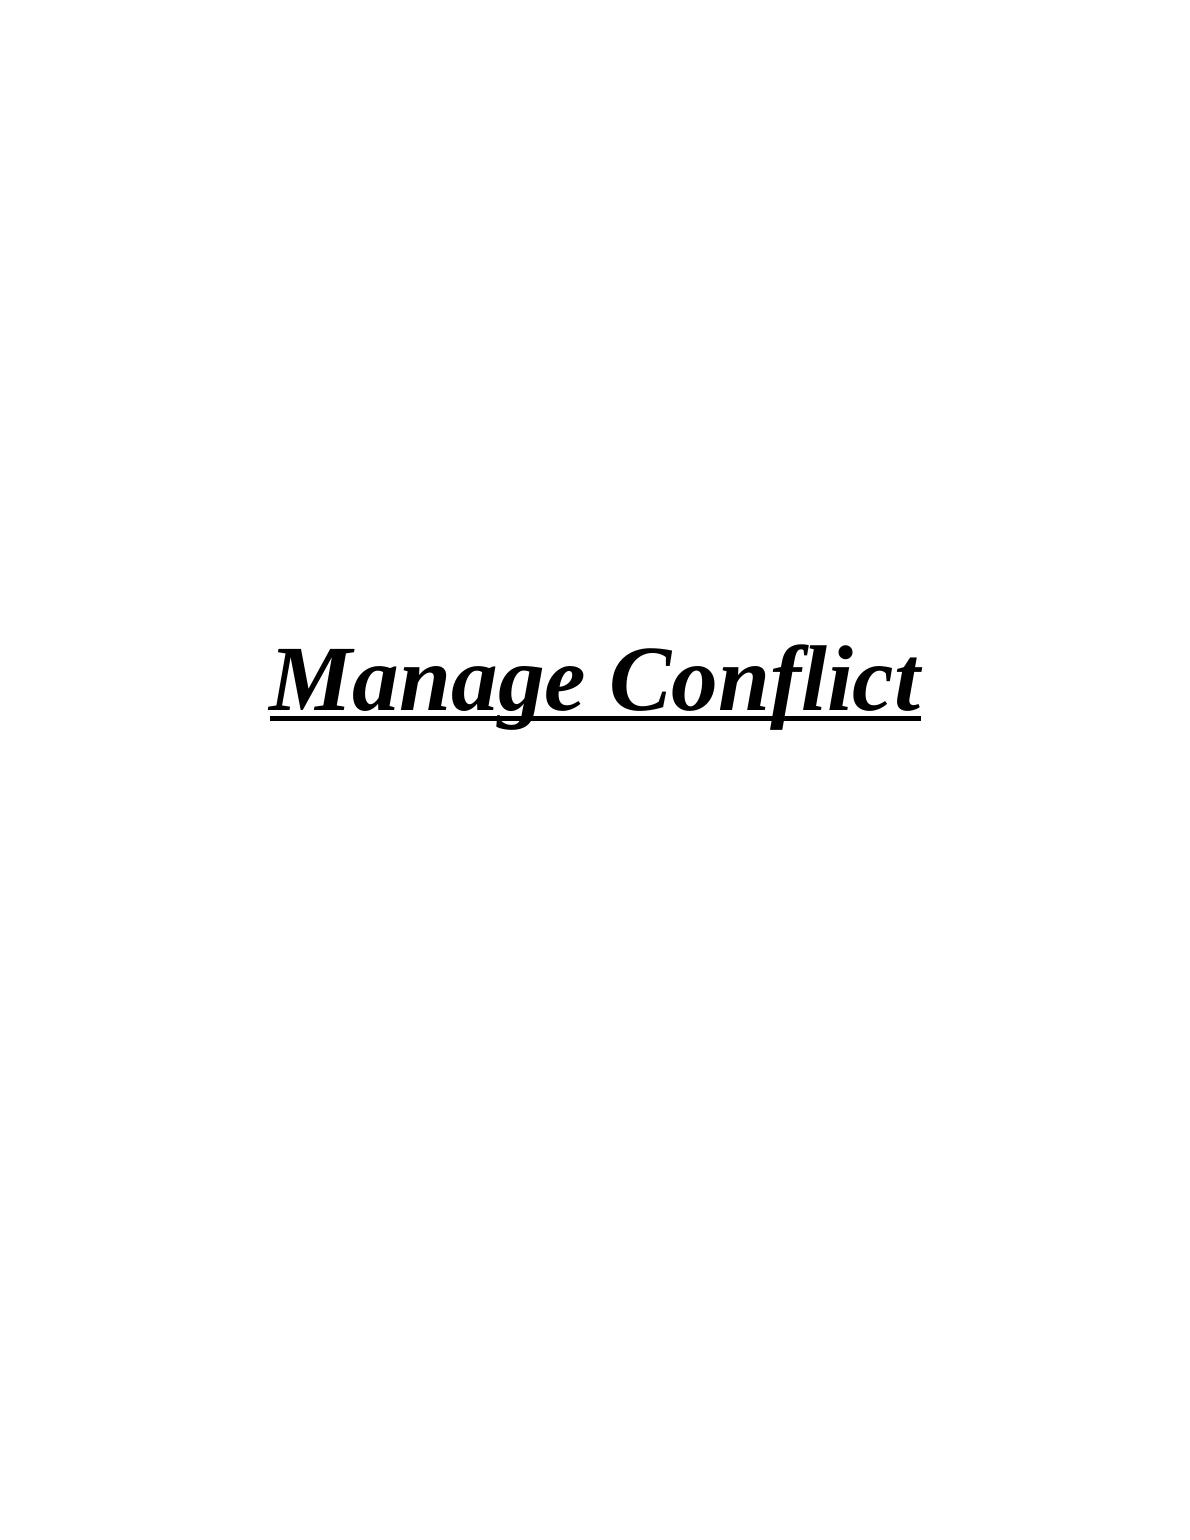 Manage Conflict: Assignment_1